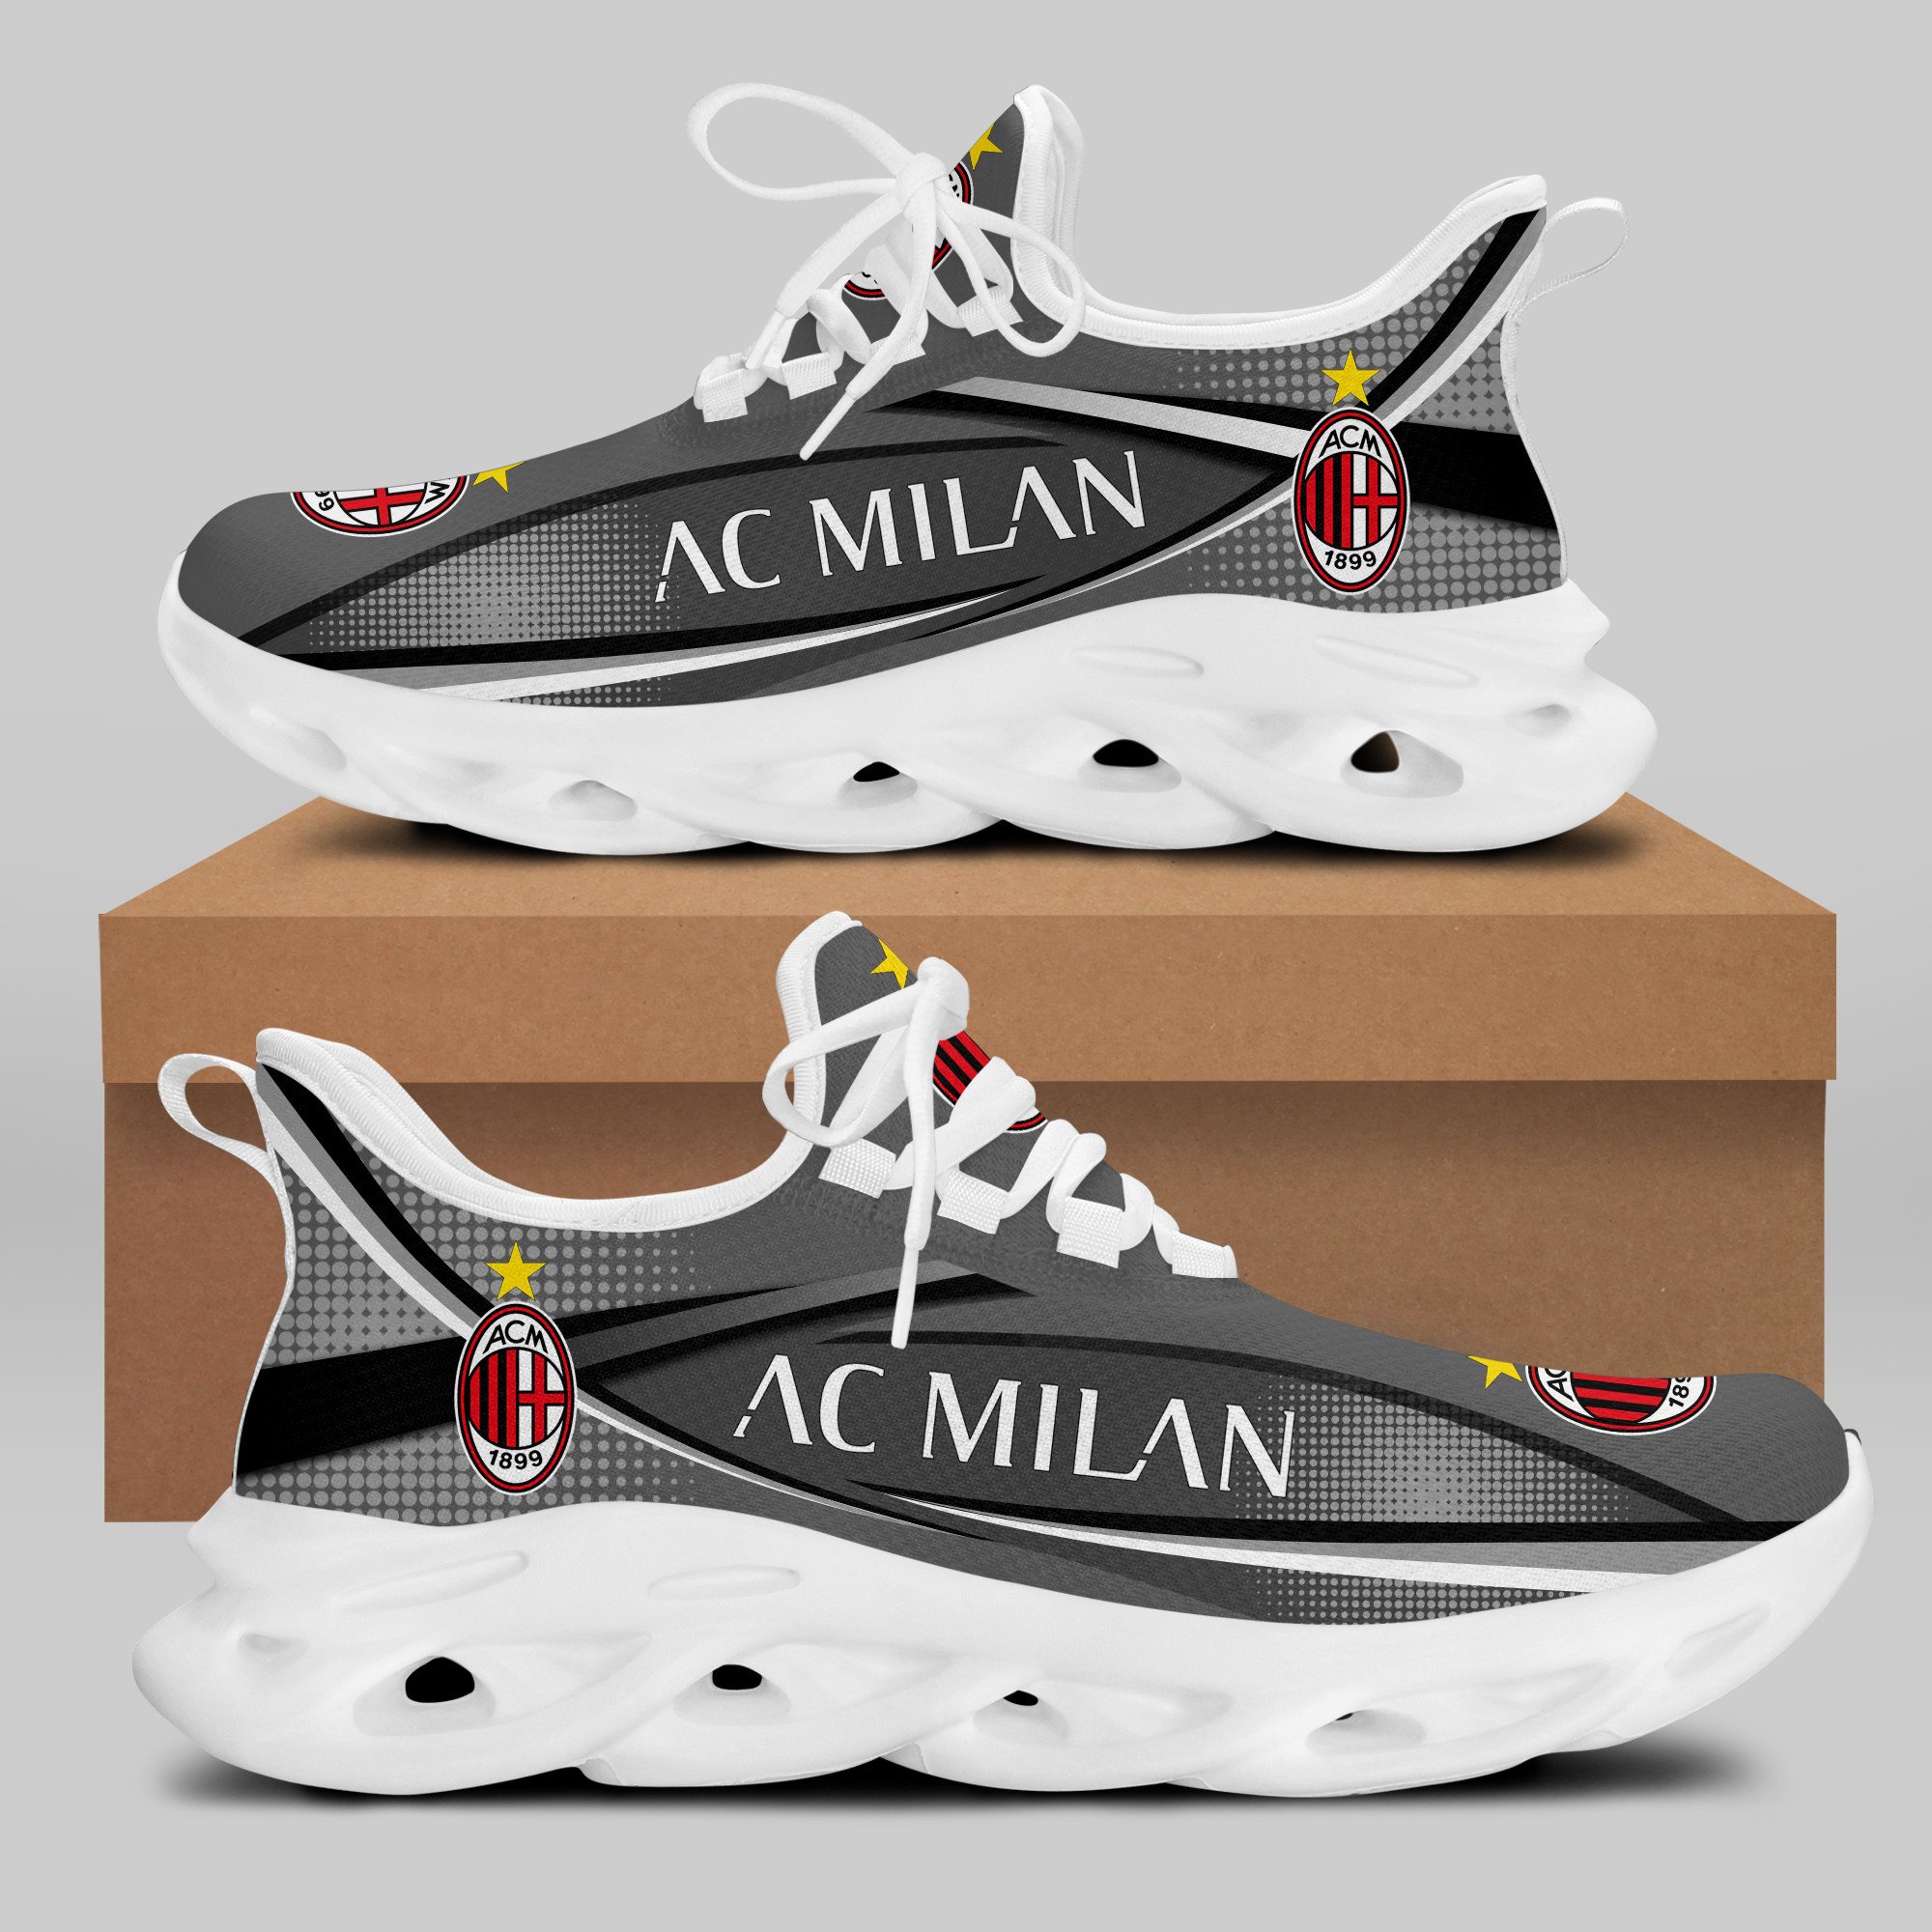 Ac Milan Running Shoes Max Soul Shoes Sneakers Ver 25 2